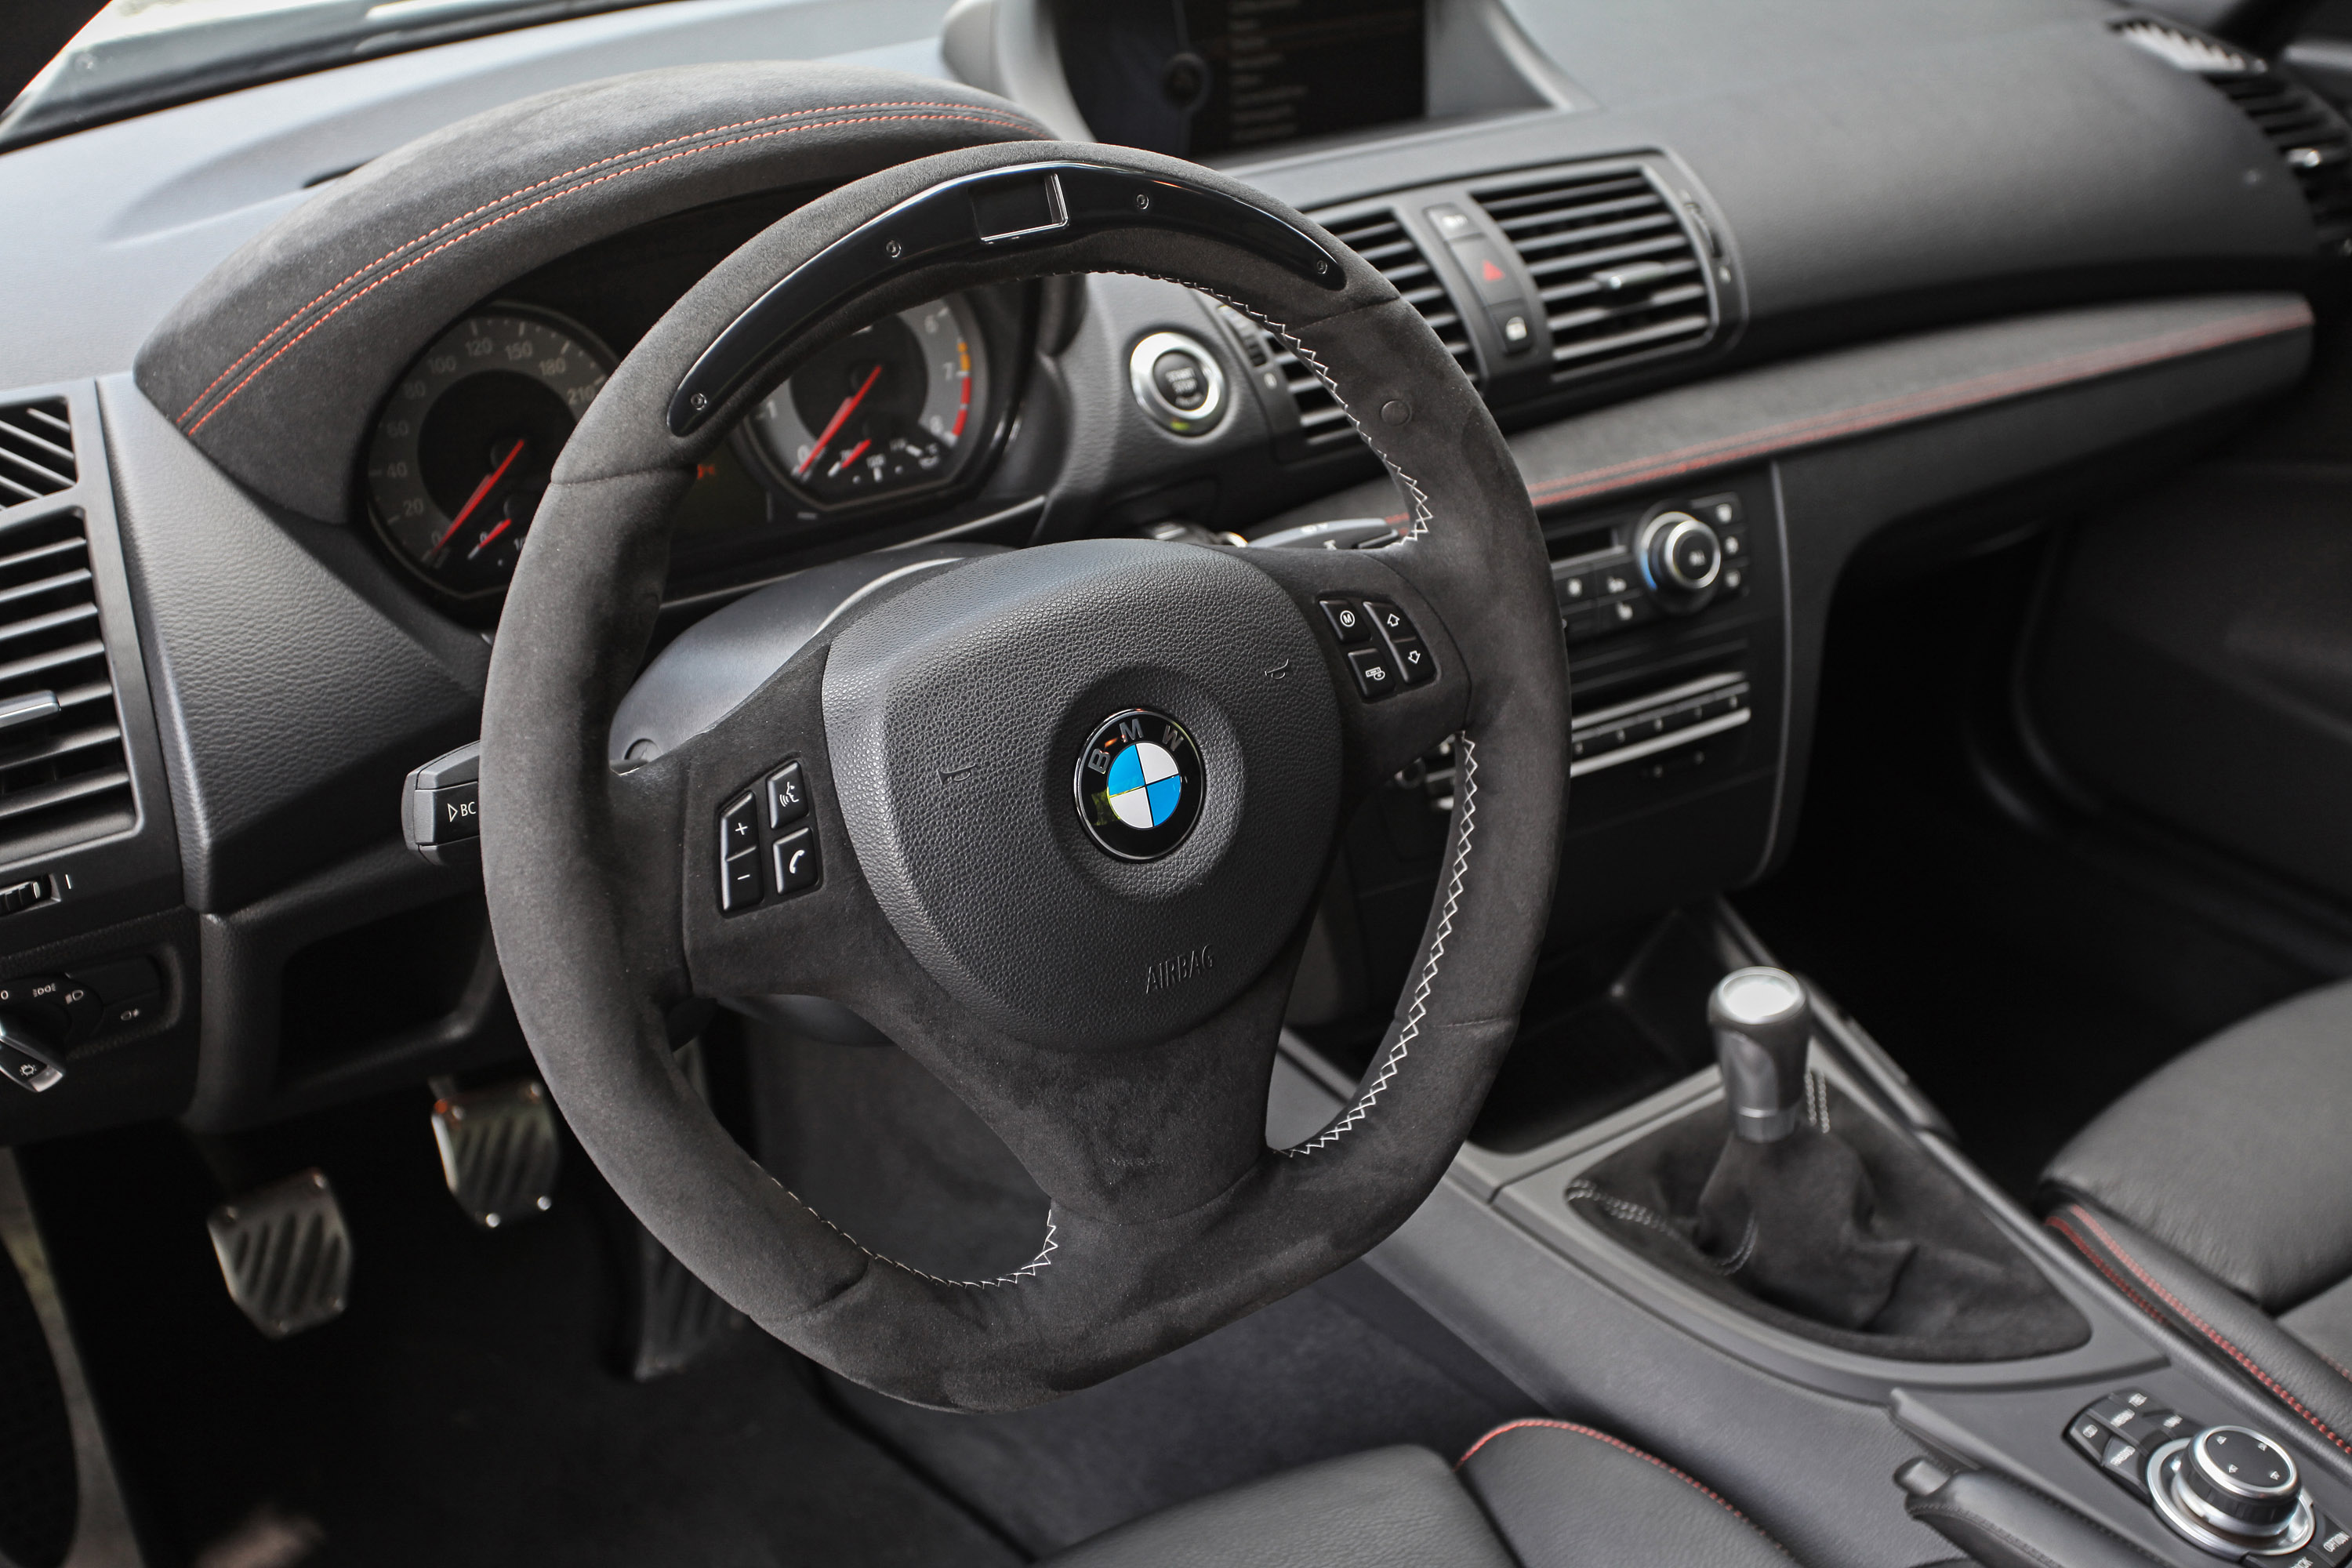 OK-Chiptuning BMW 1-Series M Coupe photo #16